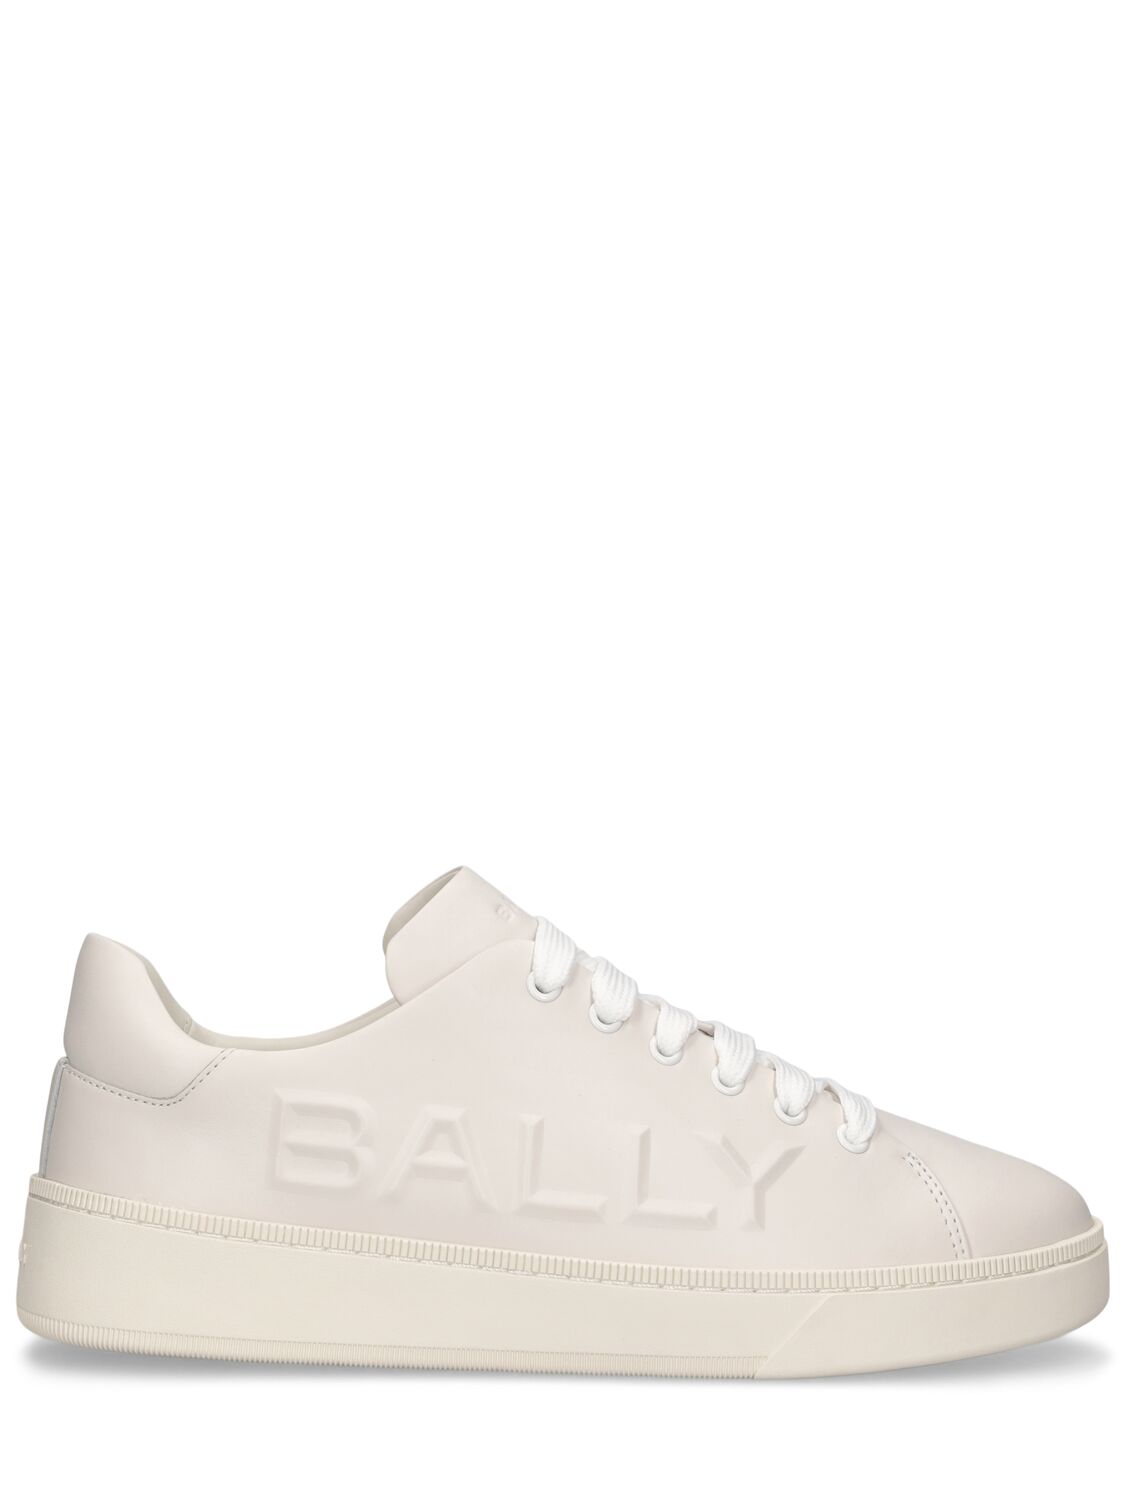 Bally Reka Leather Low Sneakers In White